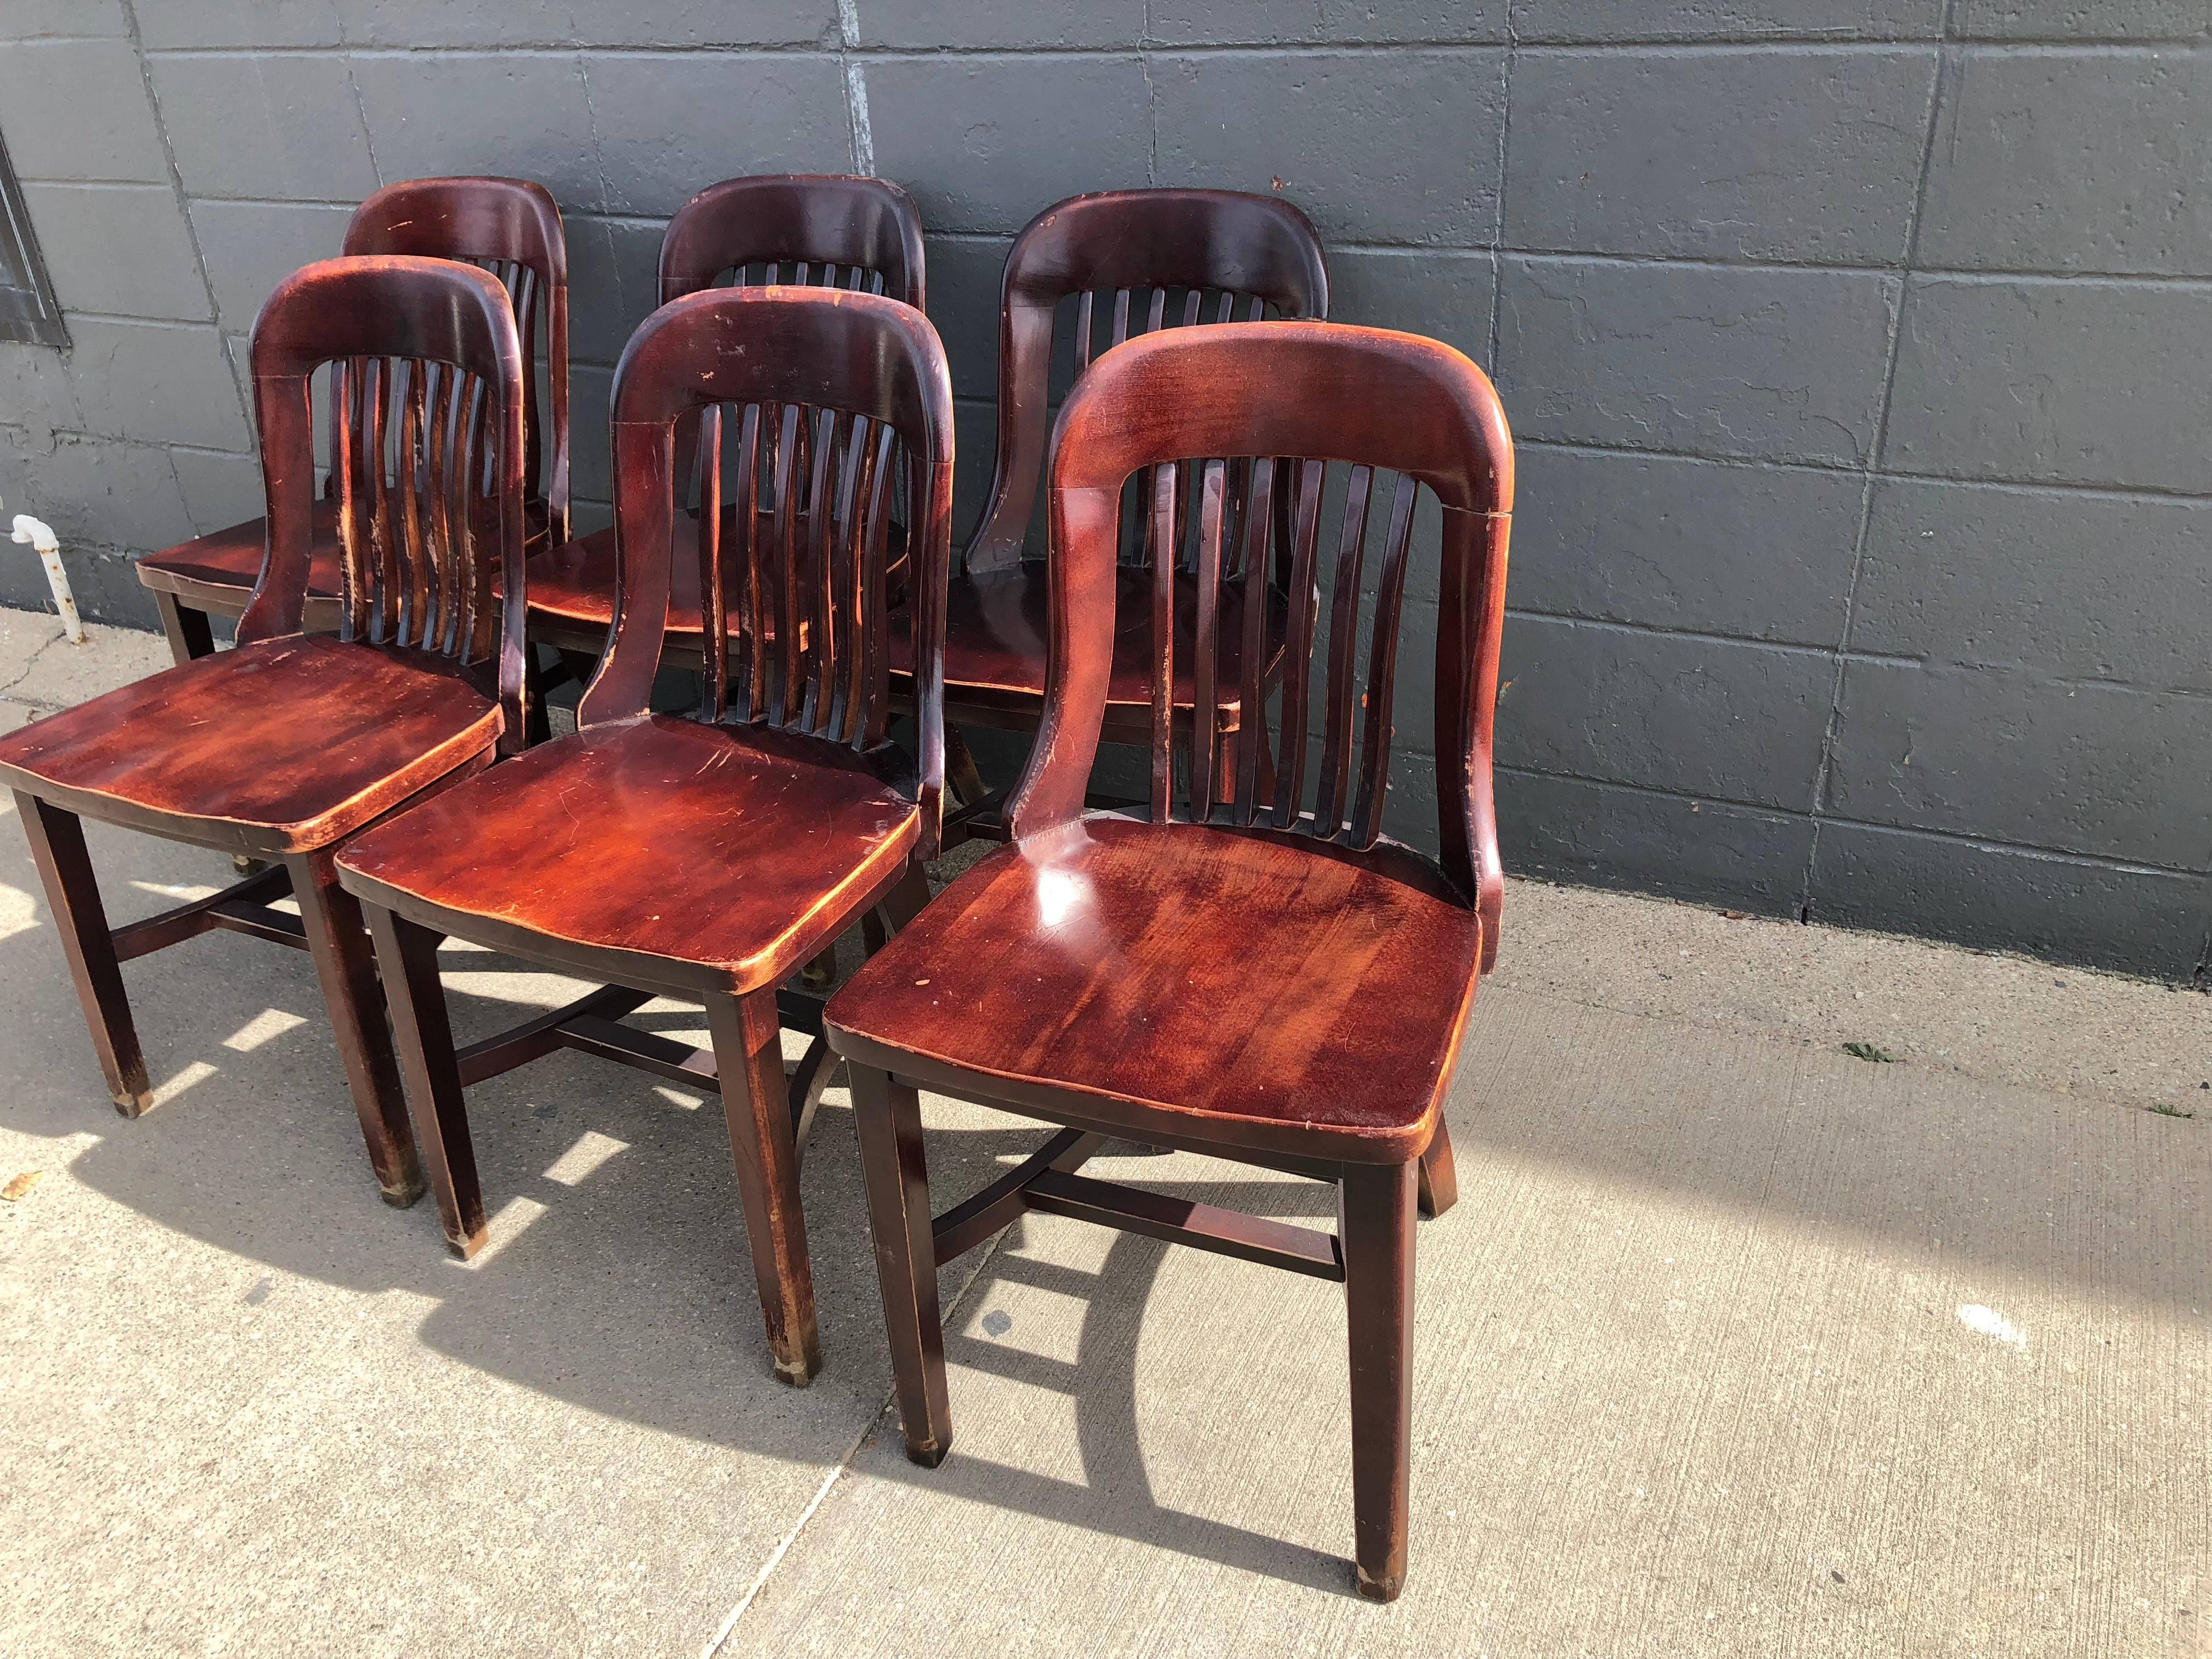 jury chairs for sale